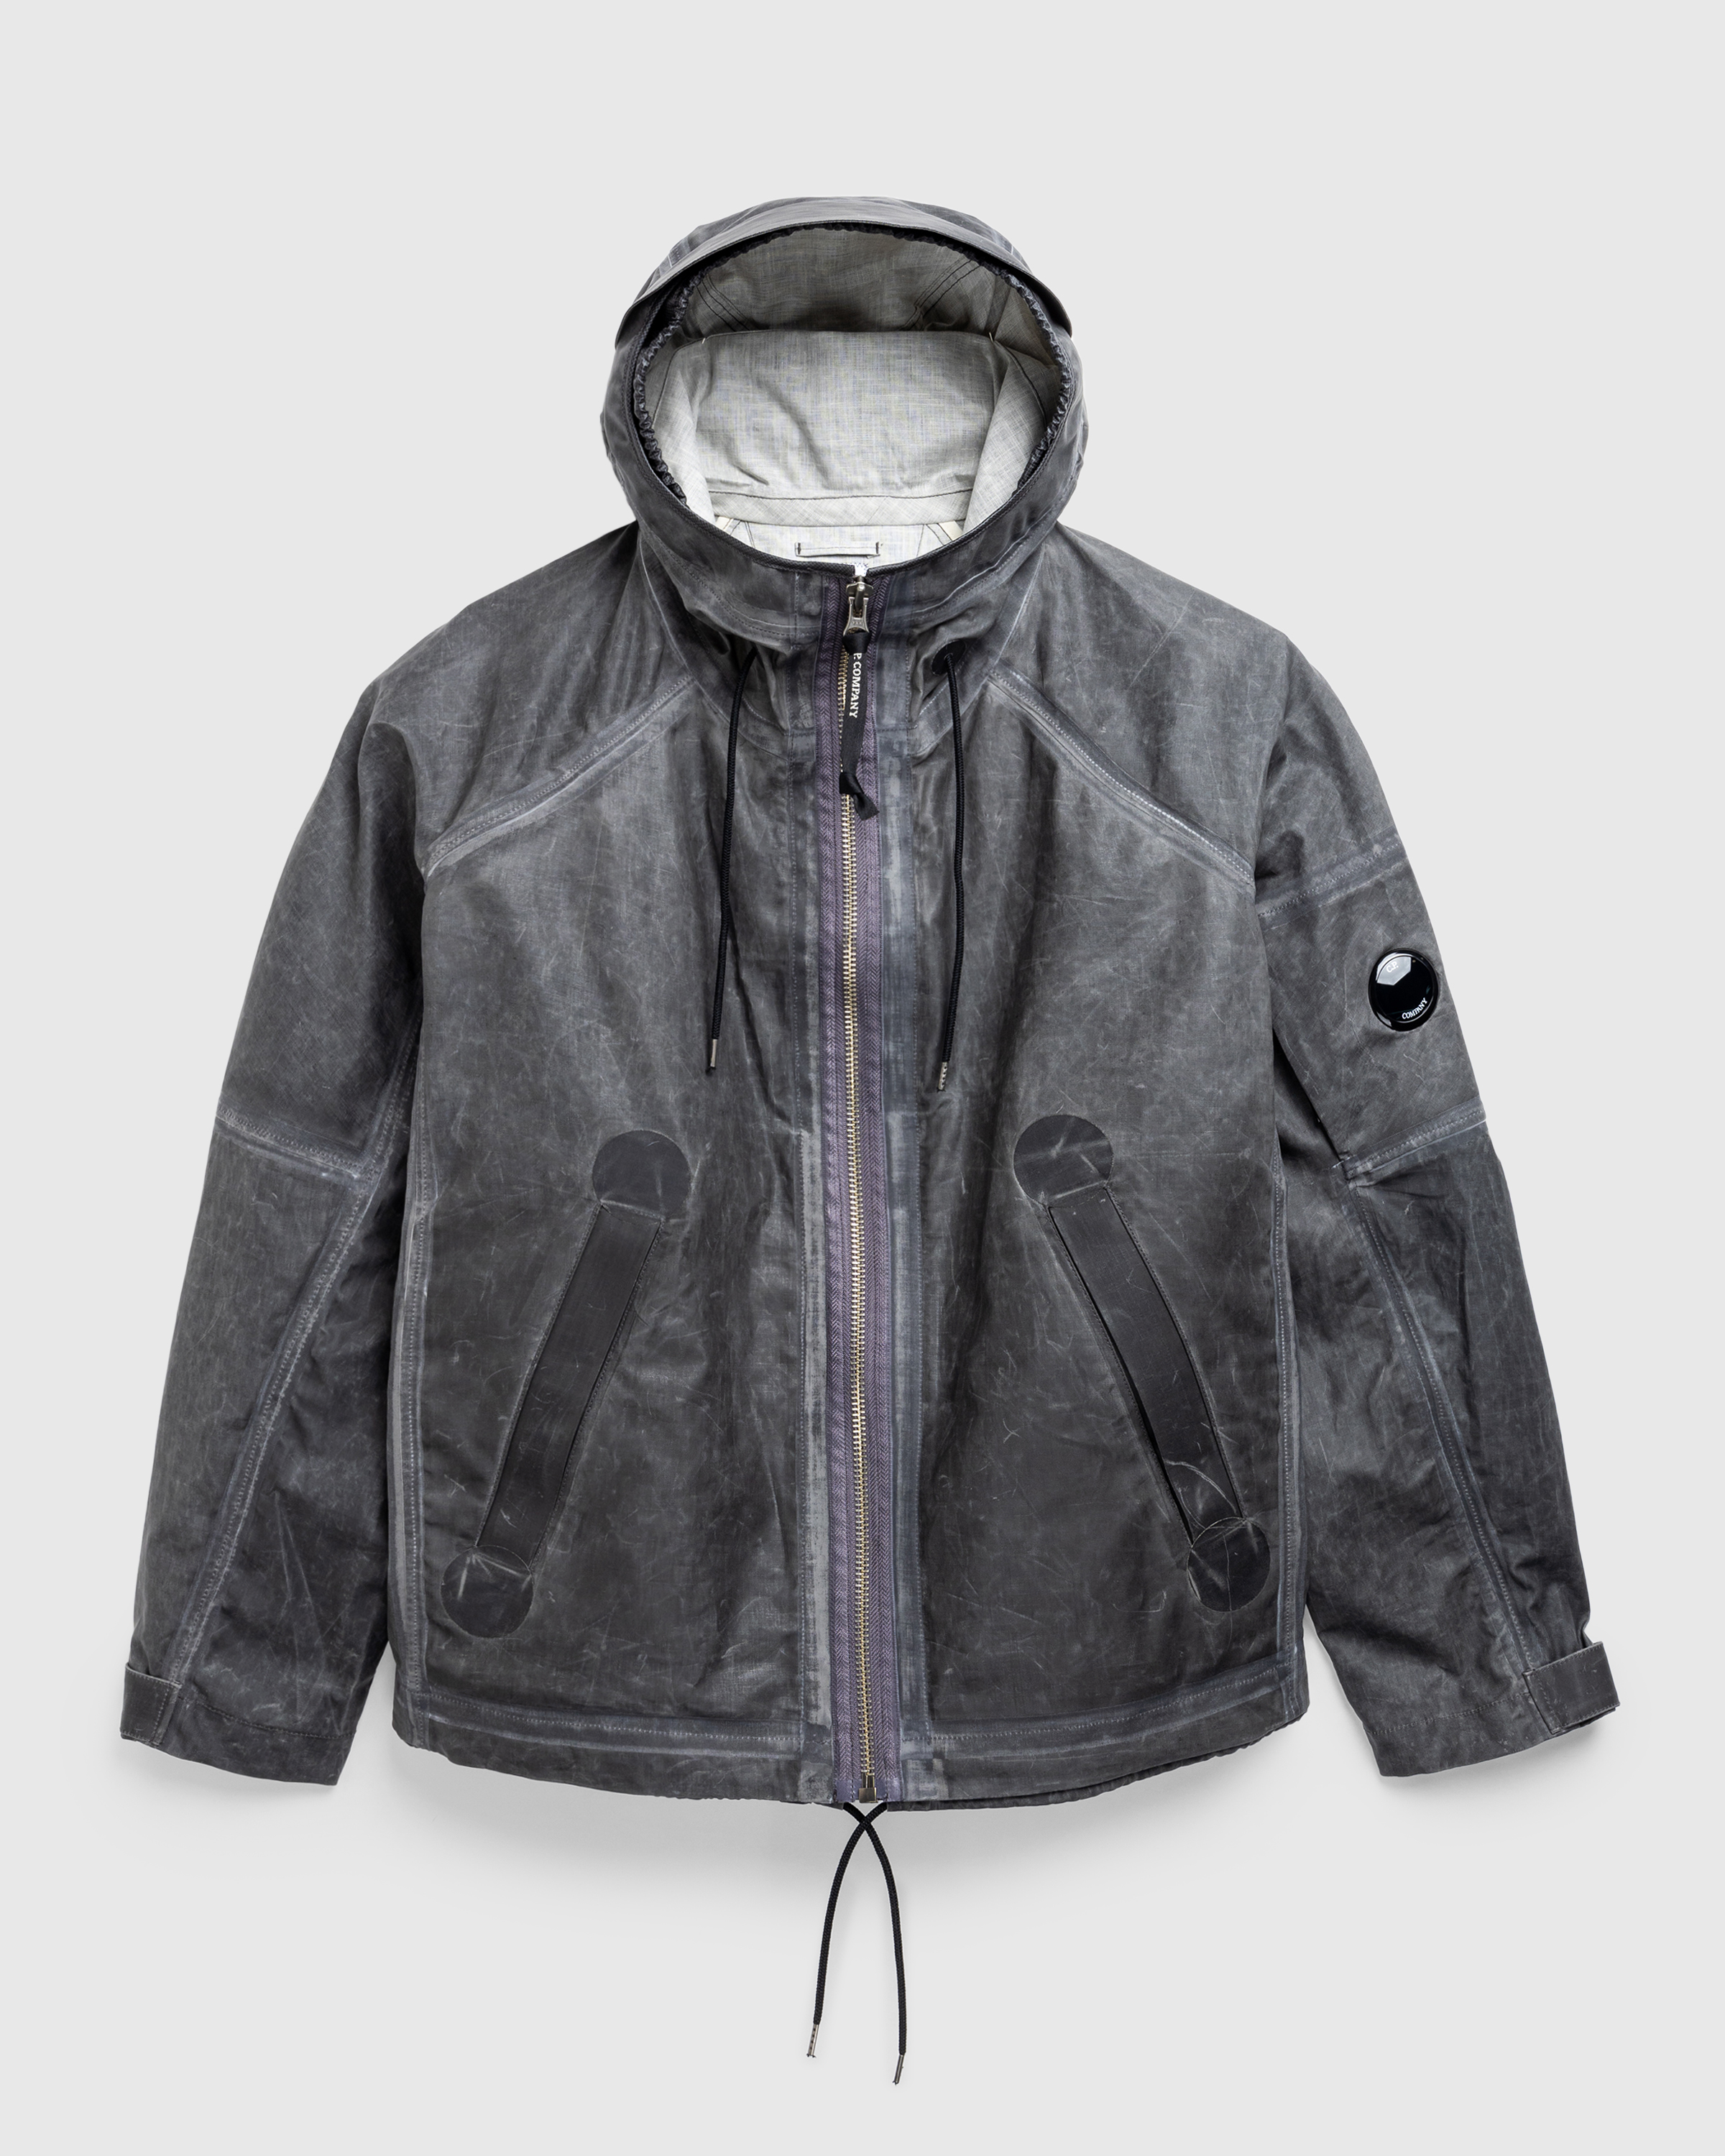 C.P. Company – Hooded Jacket Raven Grey - Outerwear - Grey - Image 1